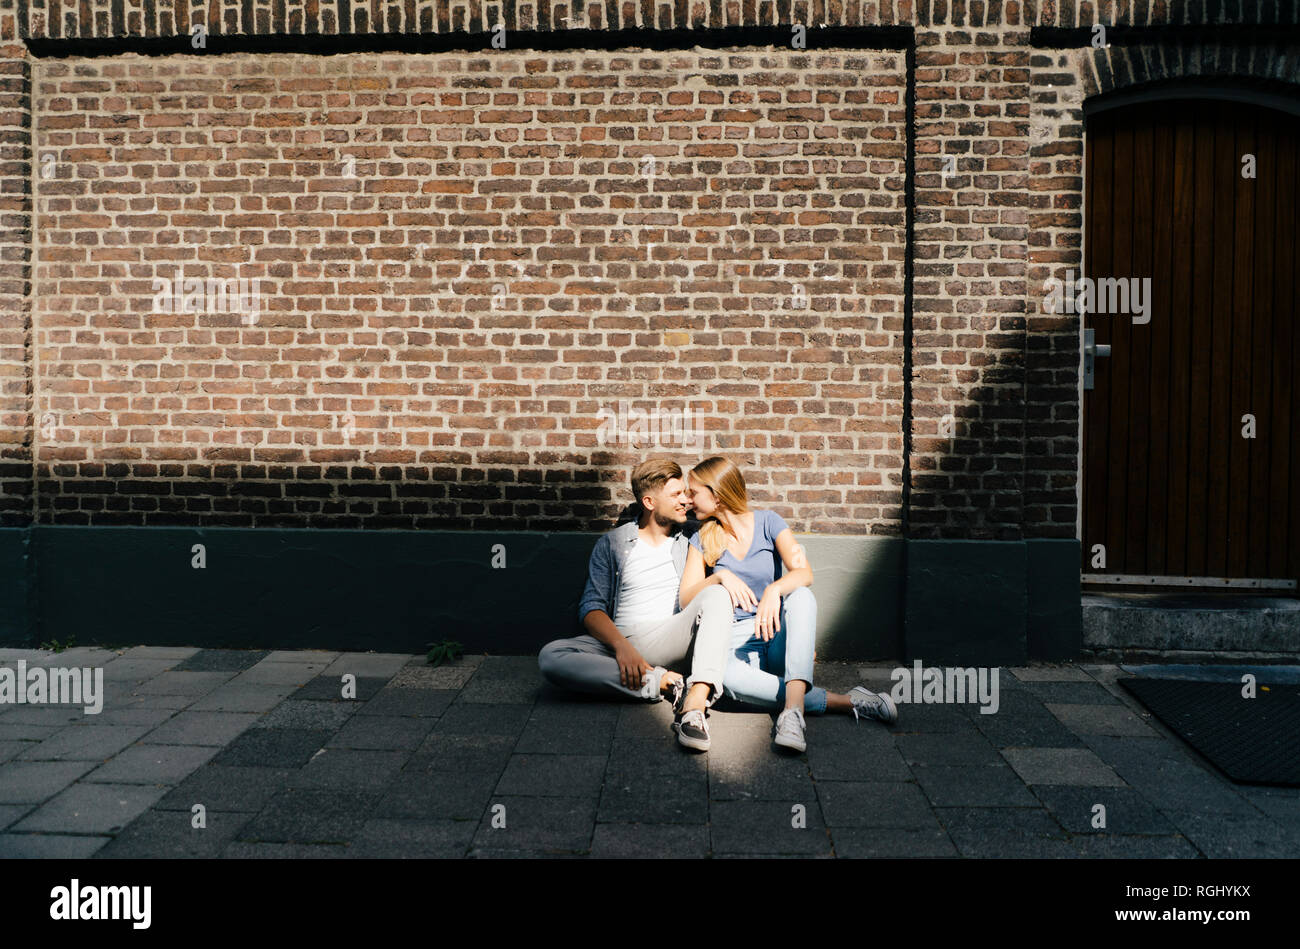 Netherlands, Maastricht, young couple having a break in the city sitting on sidewalk Stock Photo